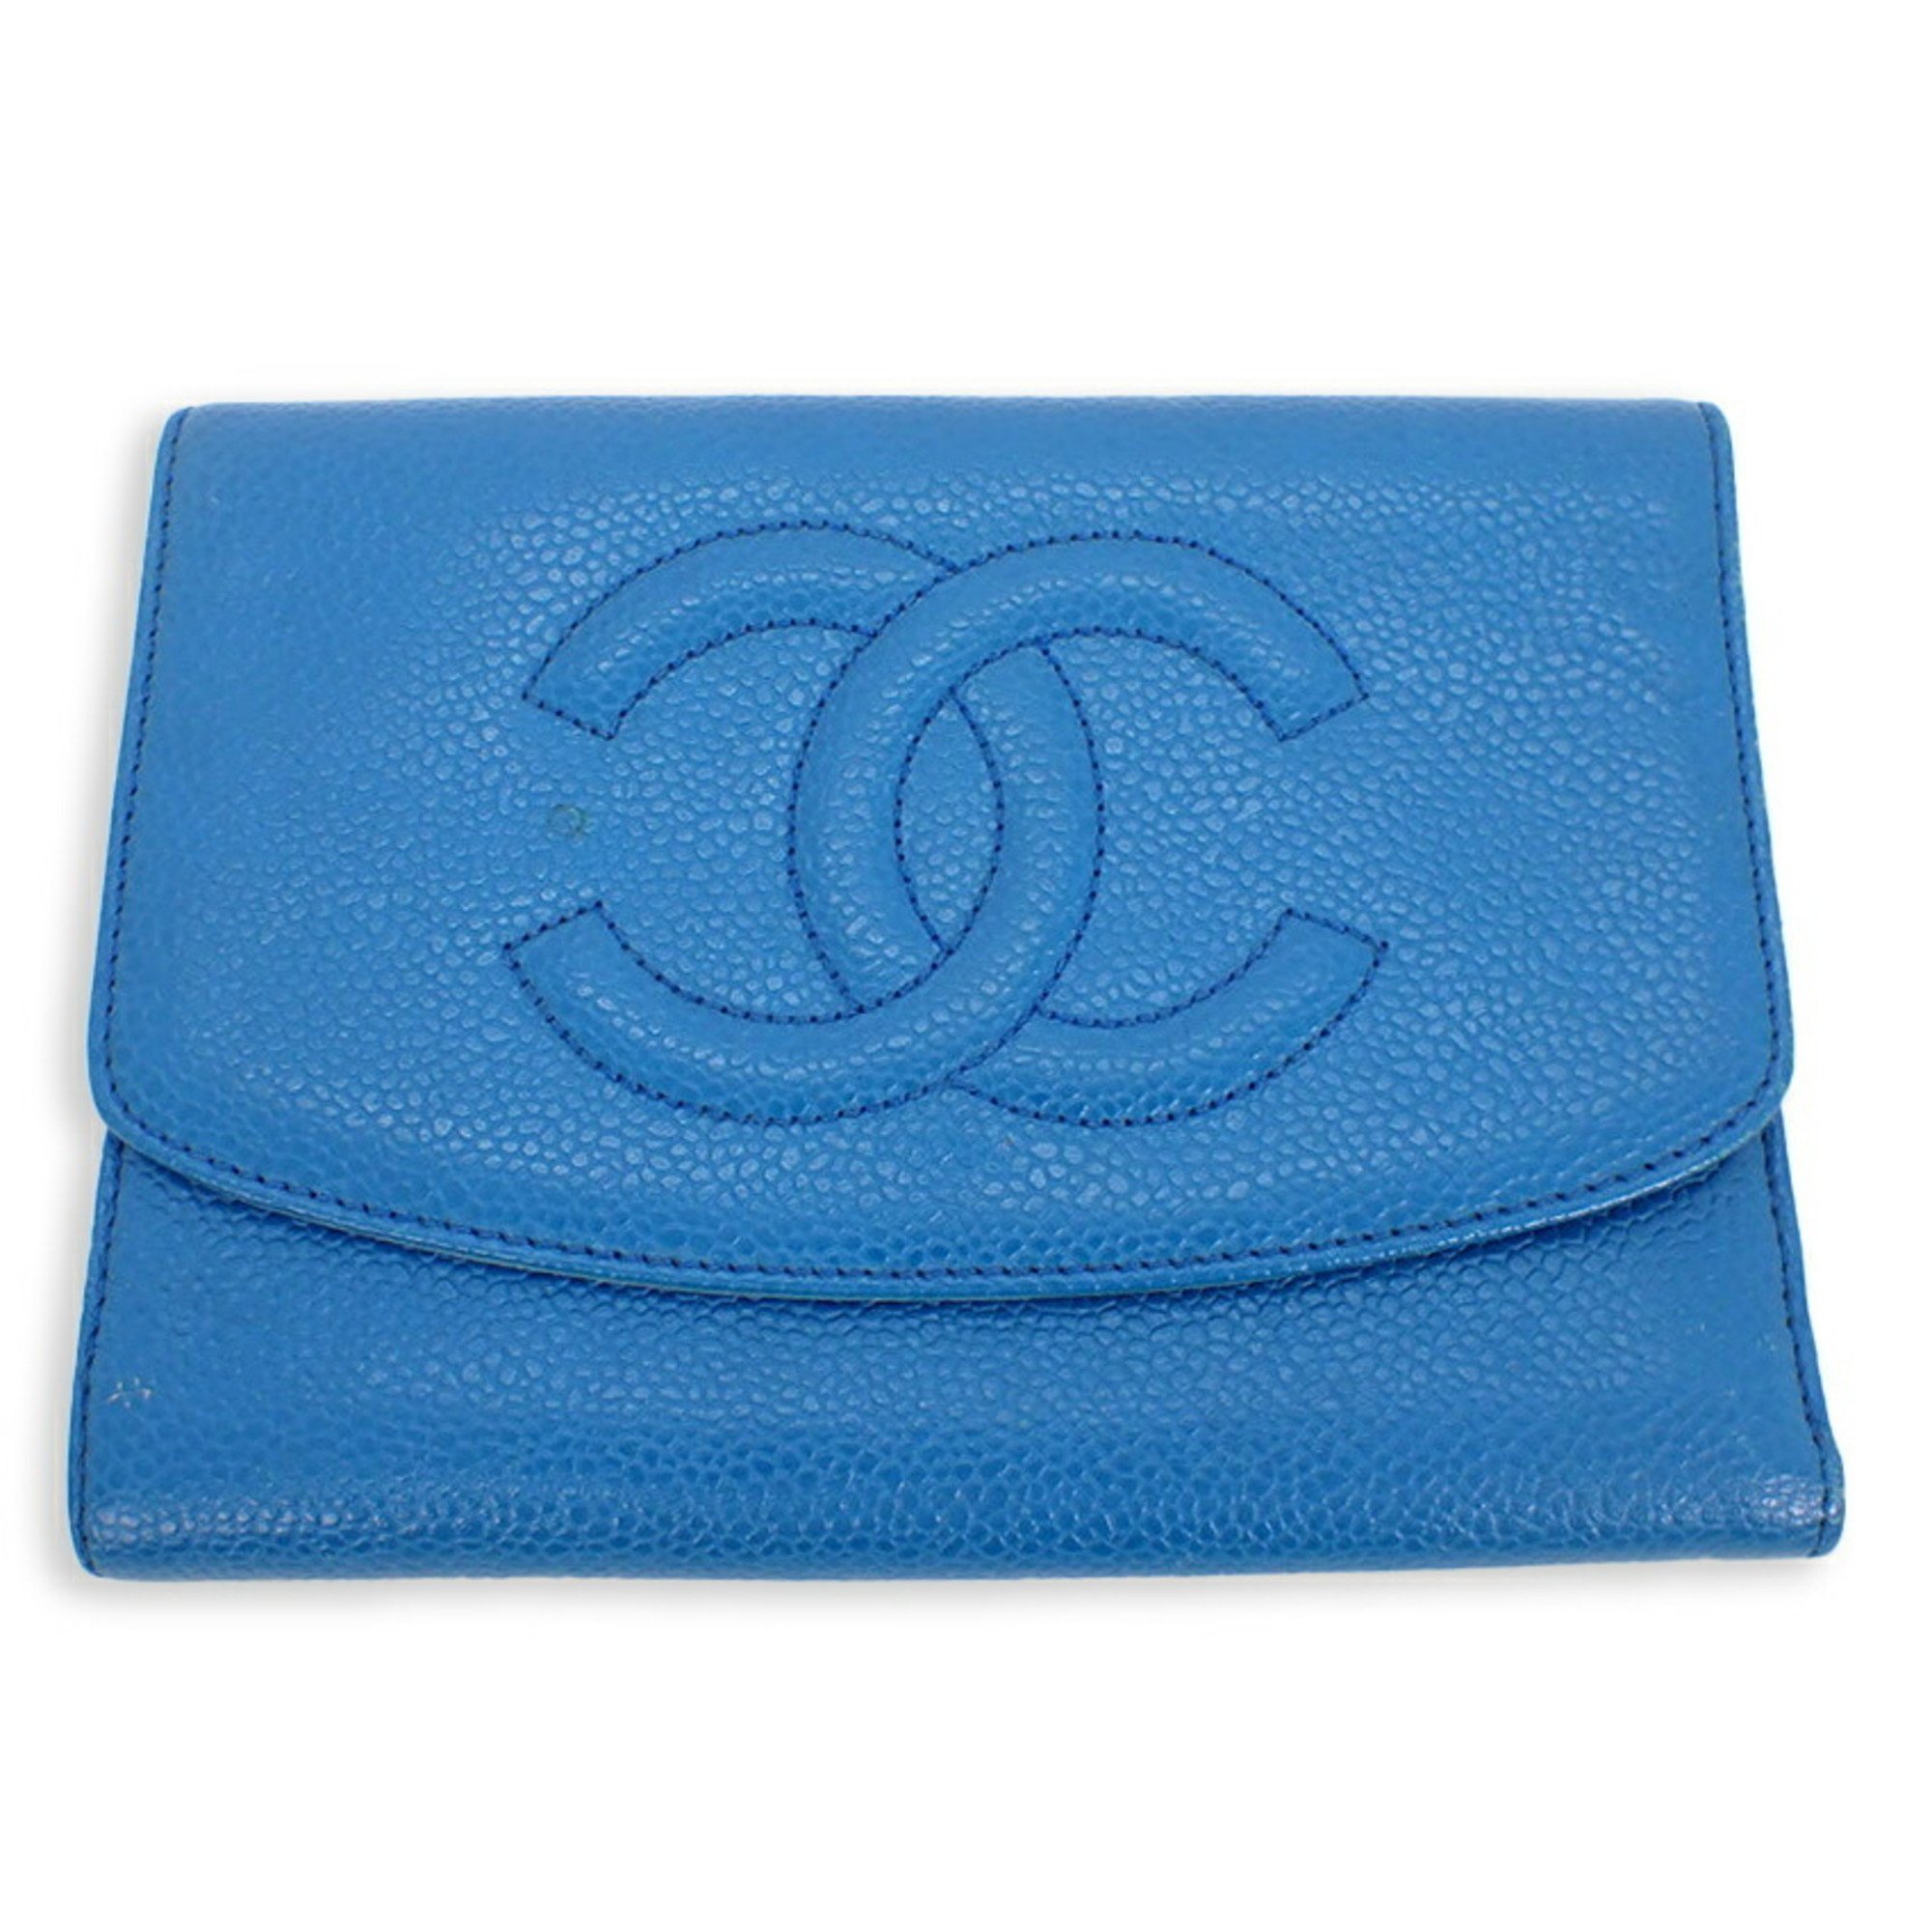 CHANEL Chanel here mark caviar skin tri-fold wallet blue with seal No. 5